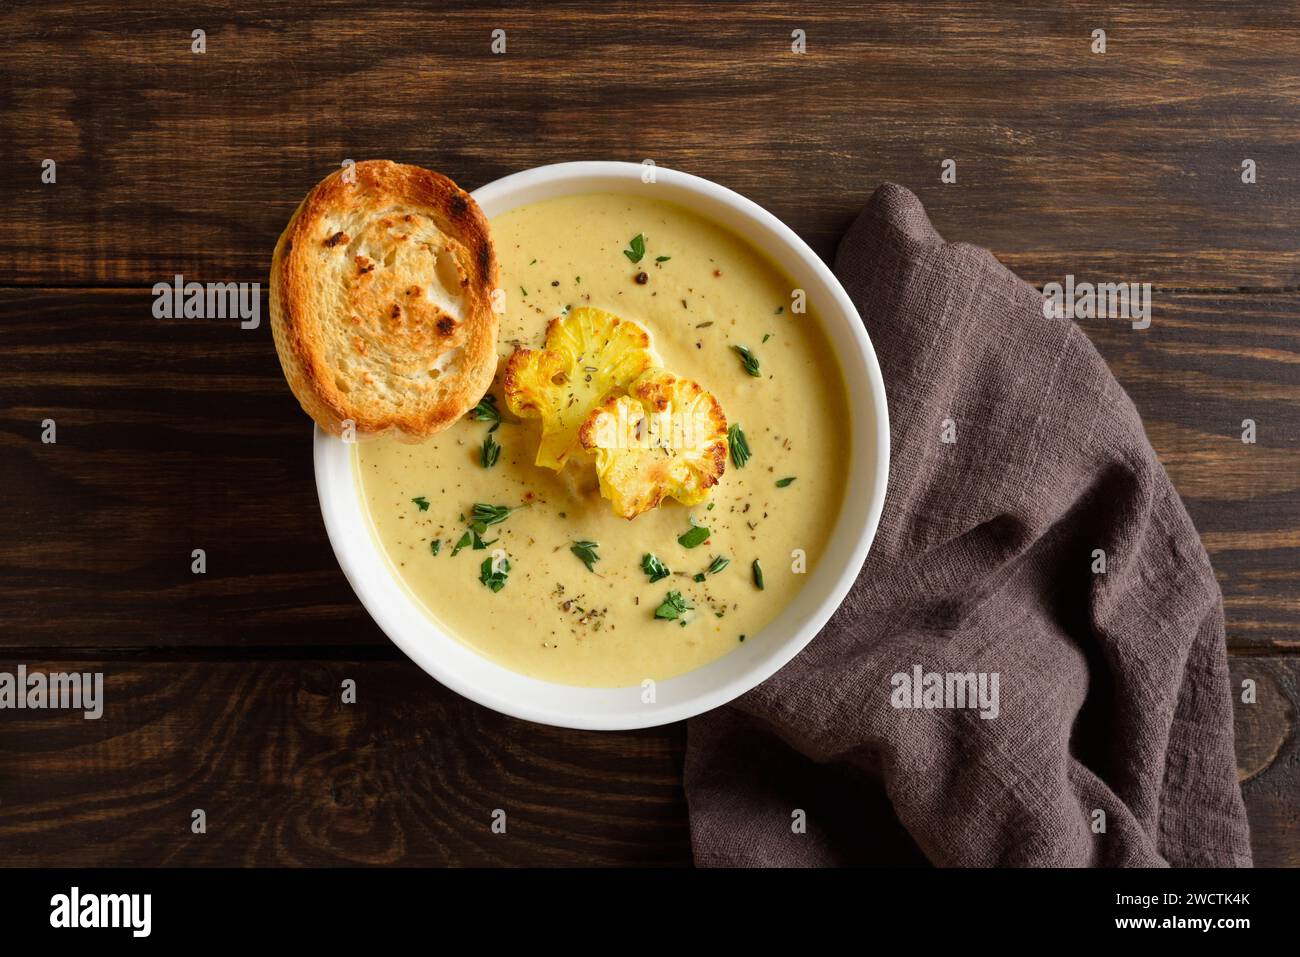 Cauliflower cheese soup in bowl over wooden background. Vegetarian or healthy diet food concept. Top view, flat lay Stock Photo